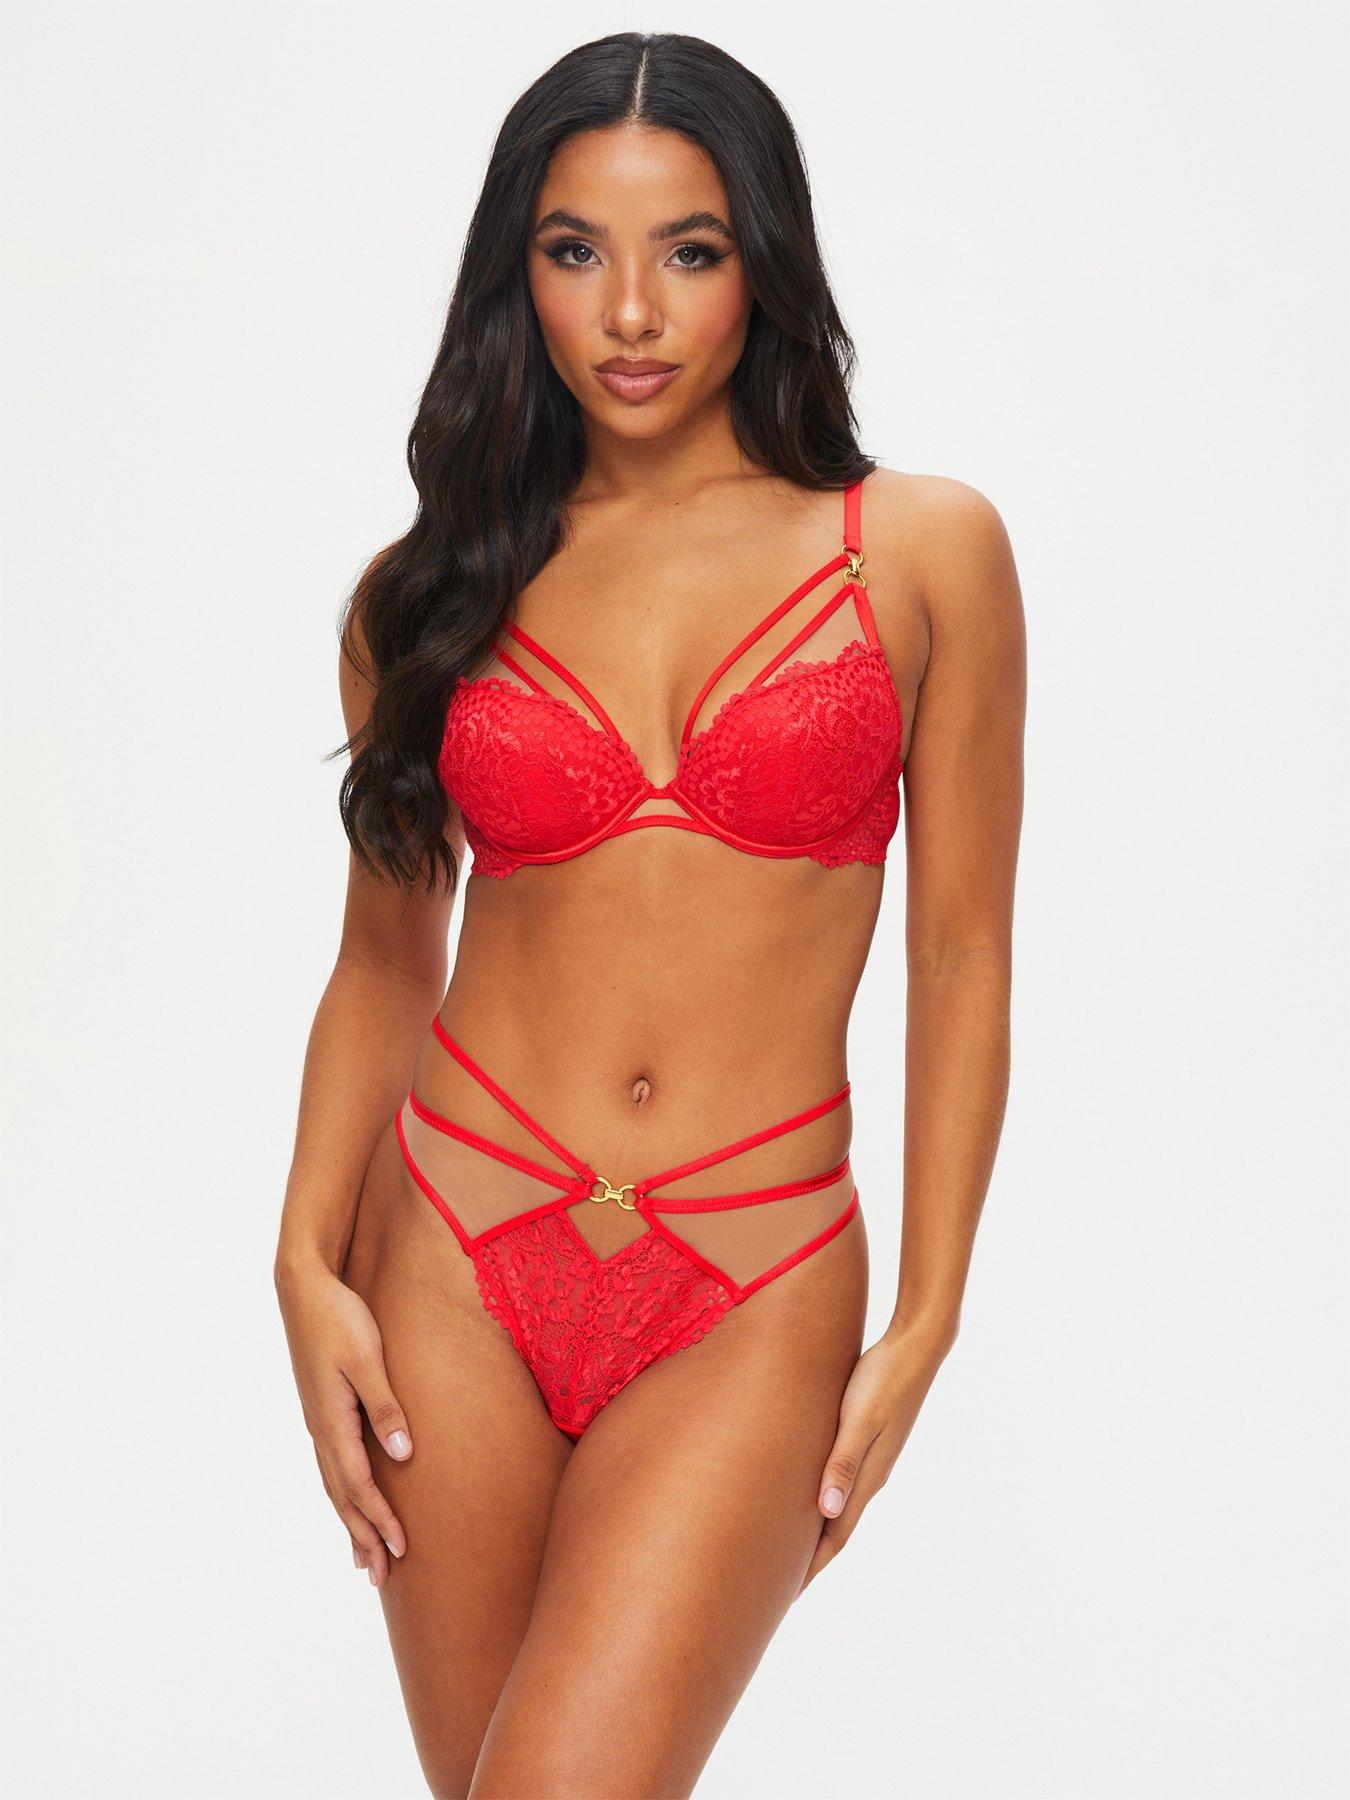 Ann Summers Bras Lovers Lace Padded Plunge Bra - Red